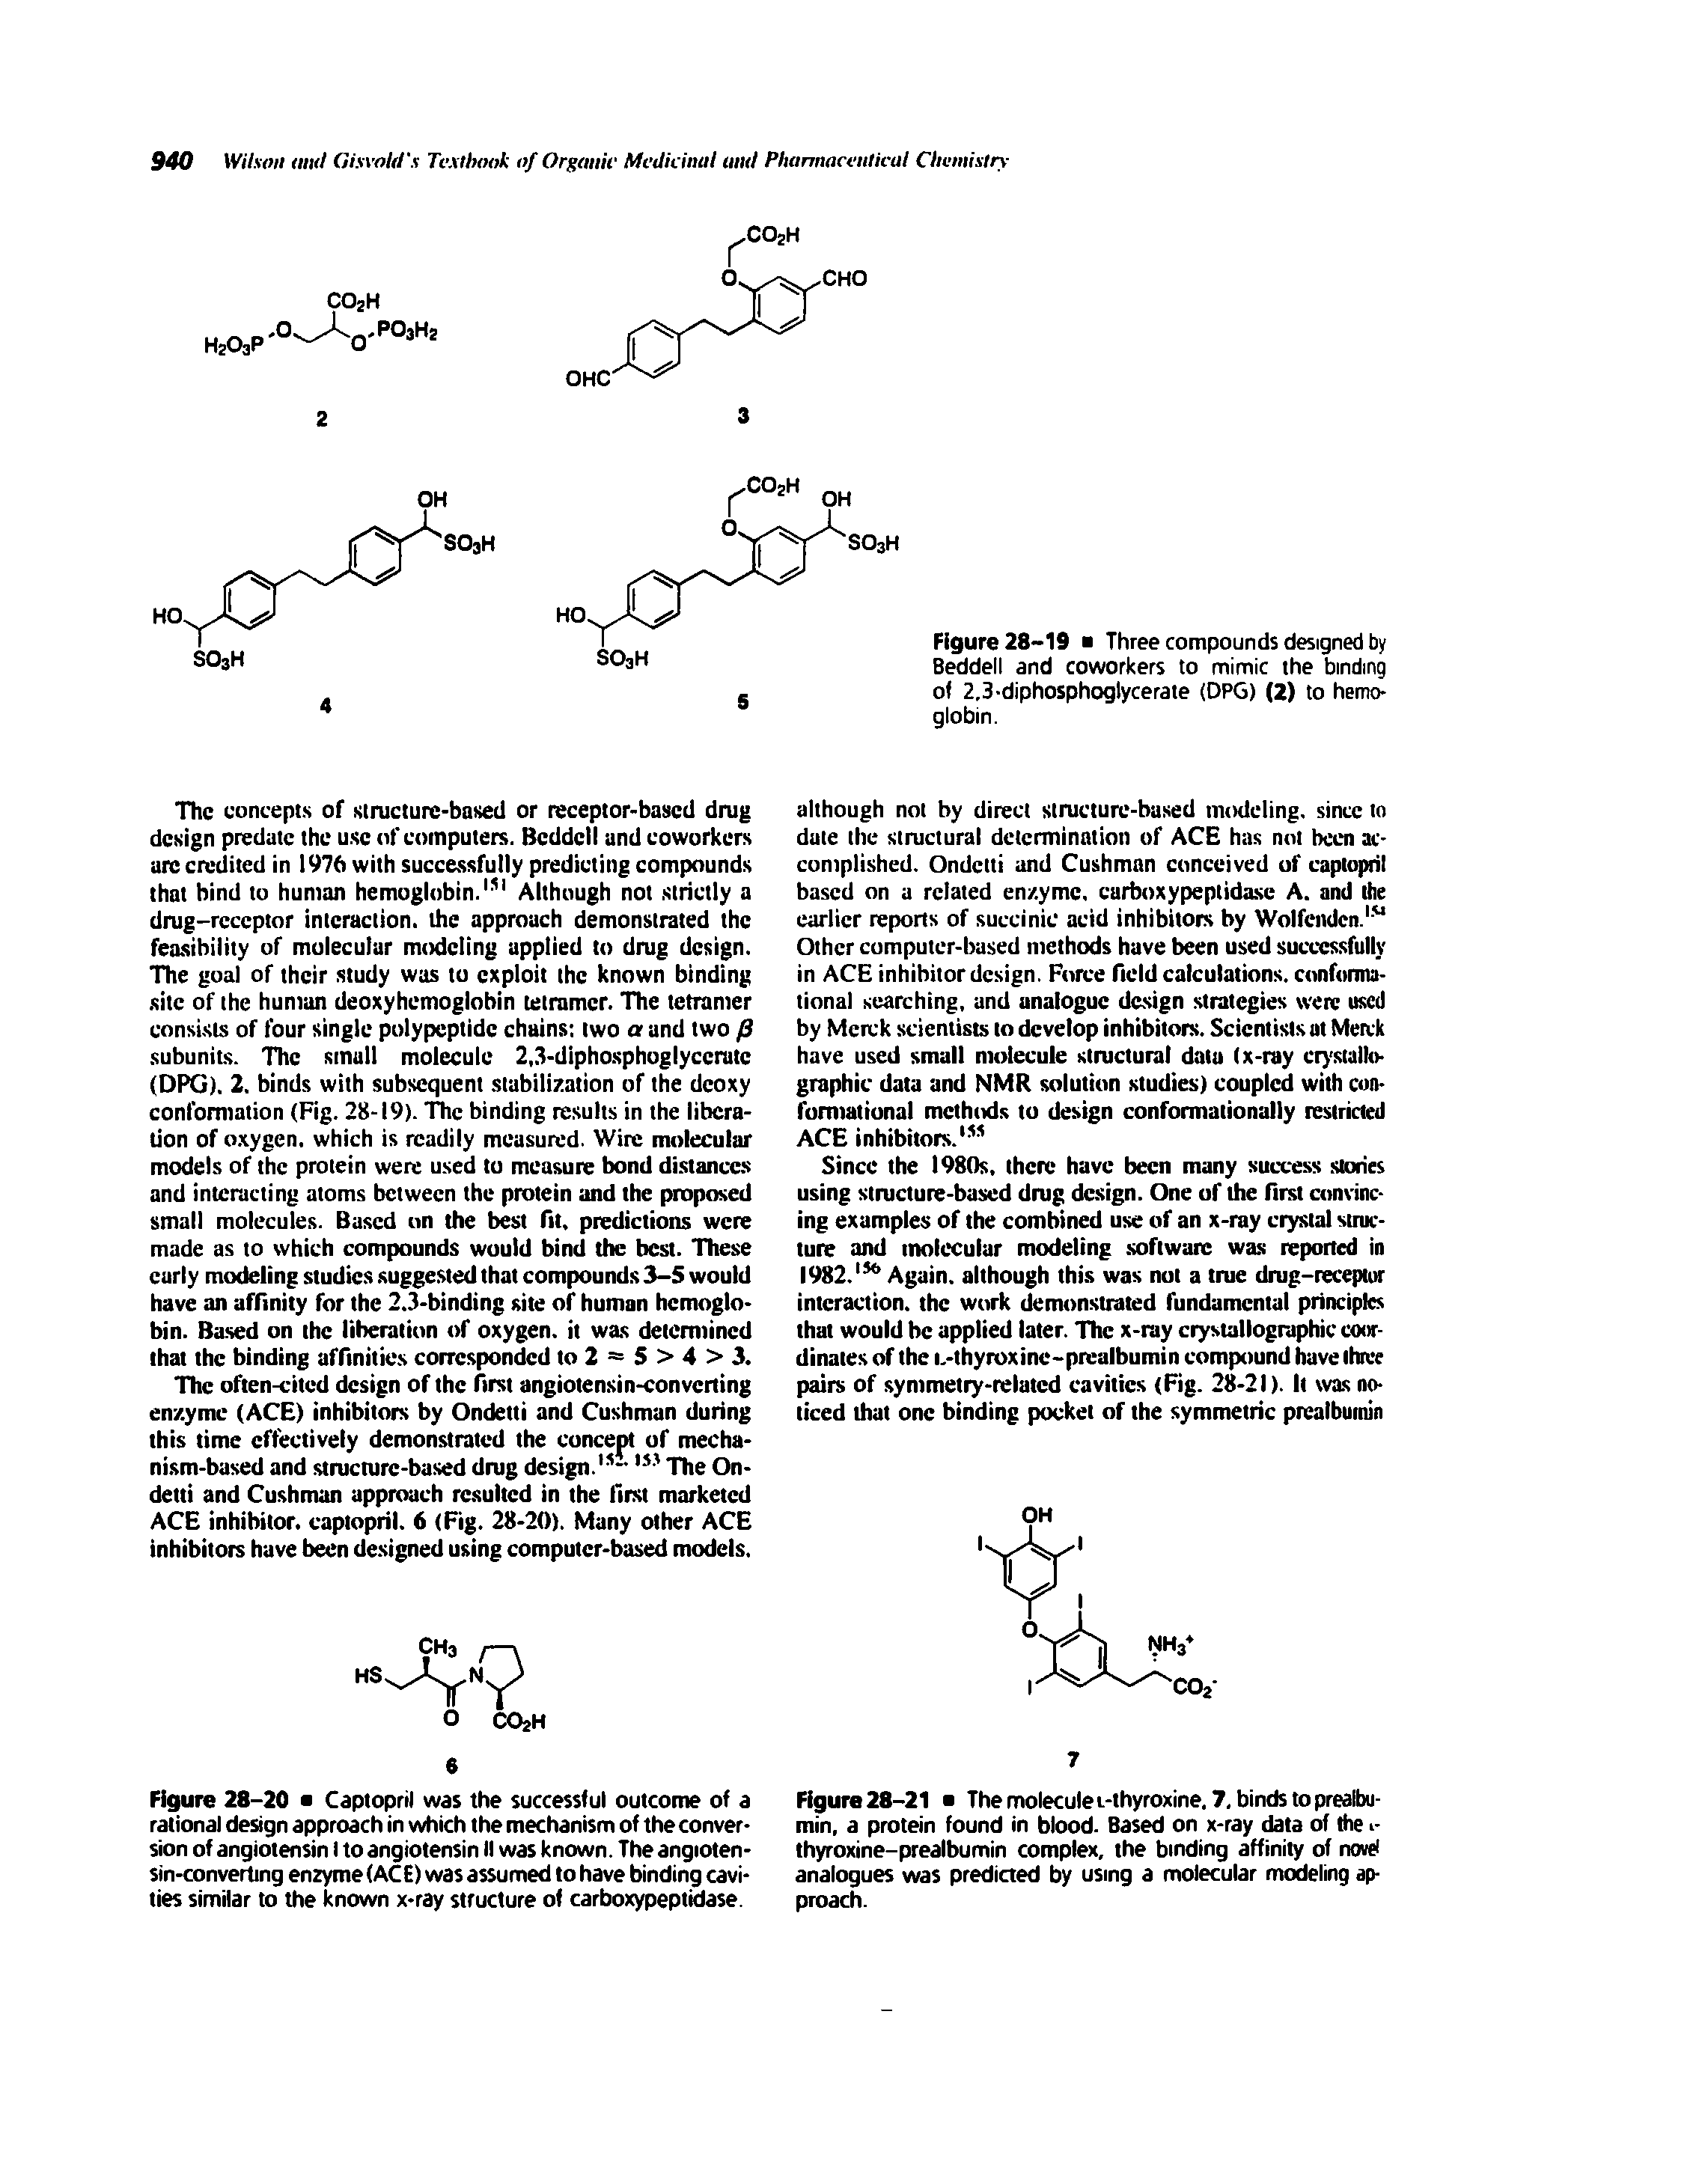 Figure 28-19 Three compounds designed by Beddell and coworkers to mimic the binding of 2.3-diphosphoglycerate (DPG) (2) to hemoglobin.